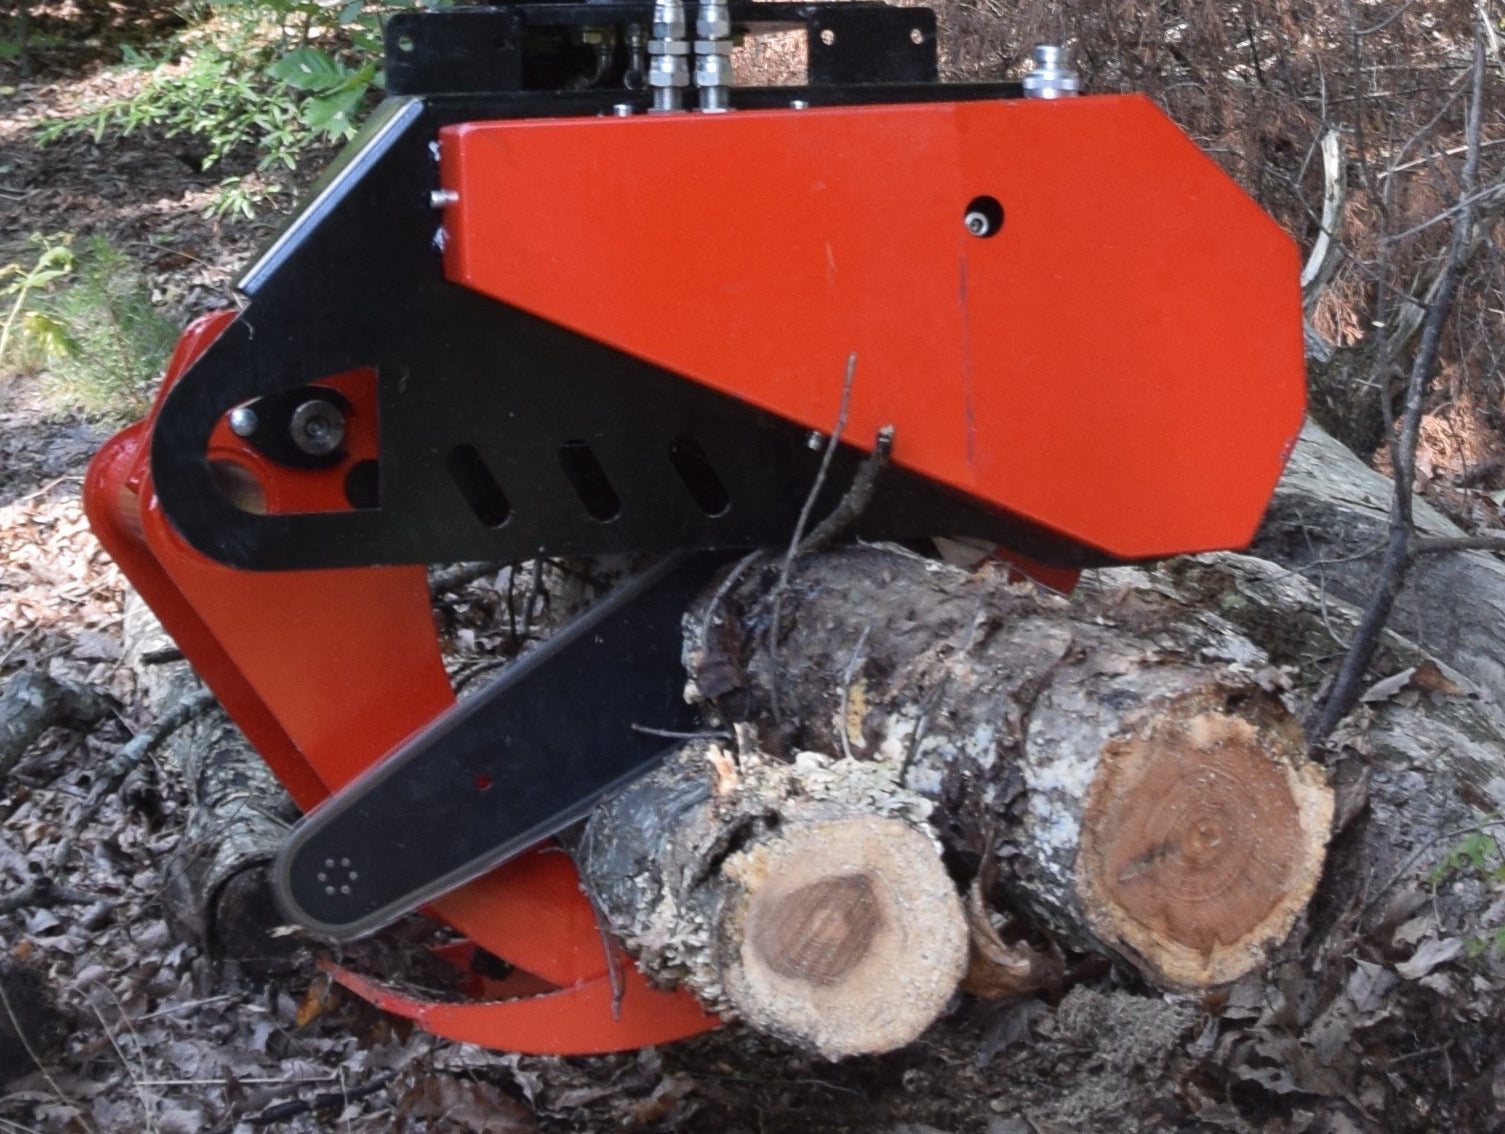 Grapple Saw Skid Steer Attachment for Bobcat